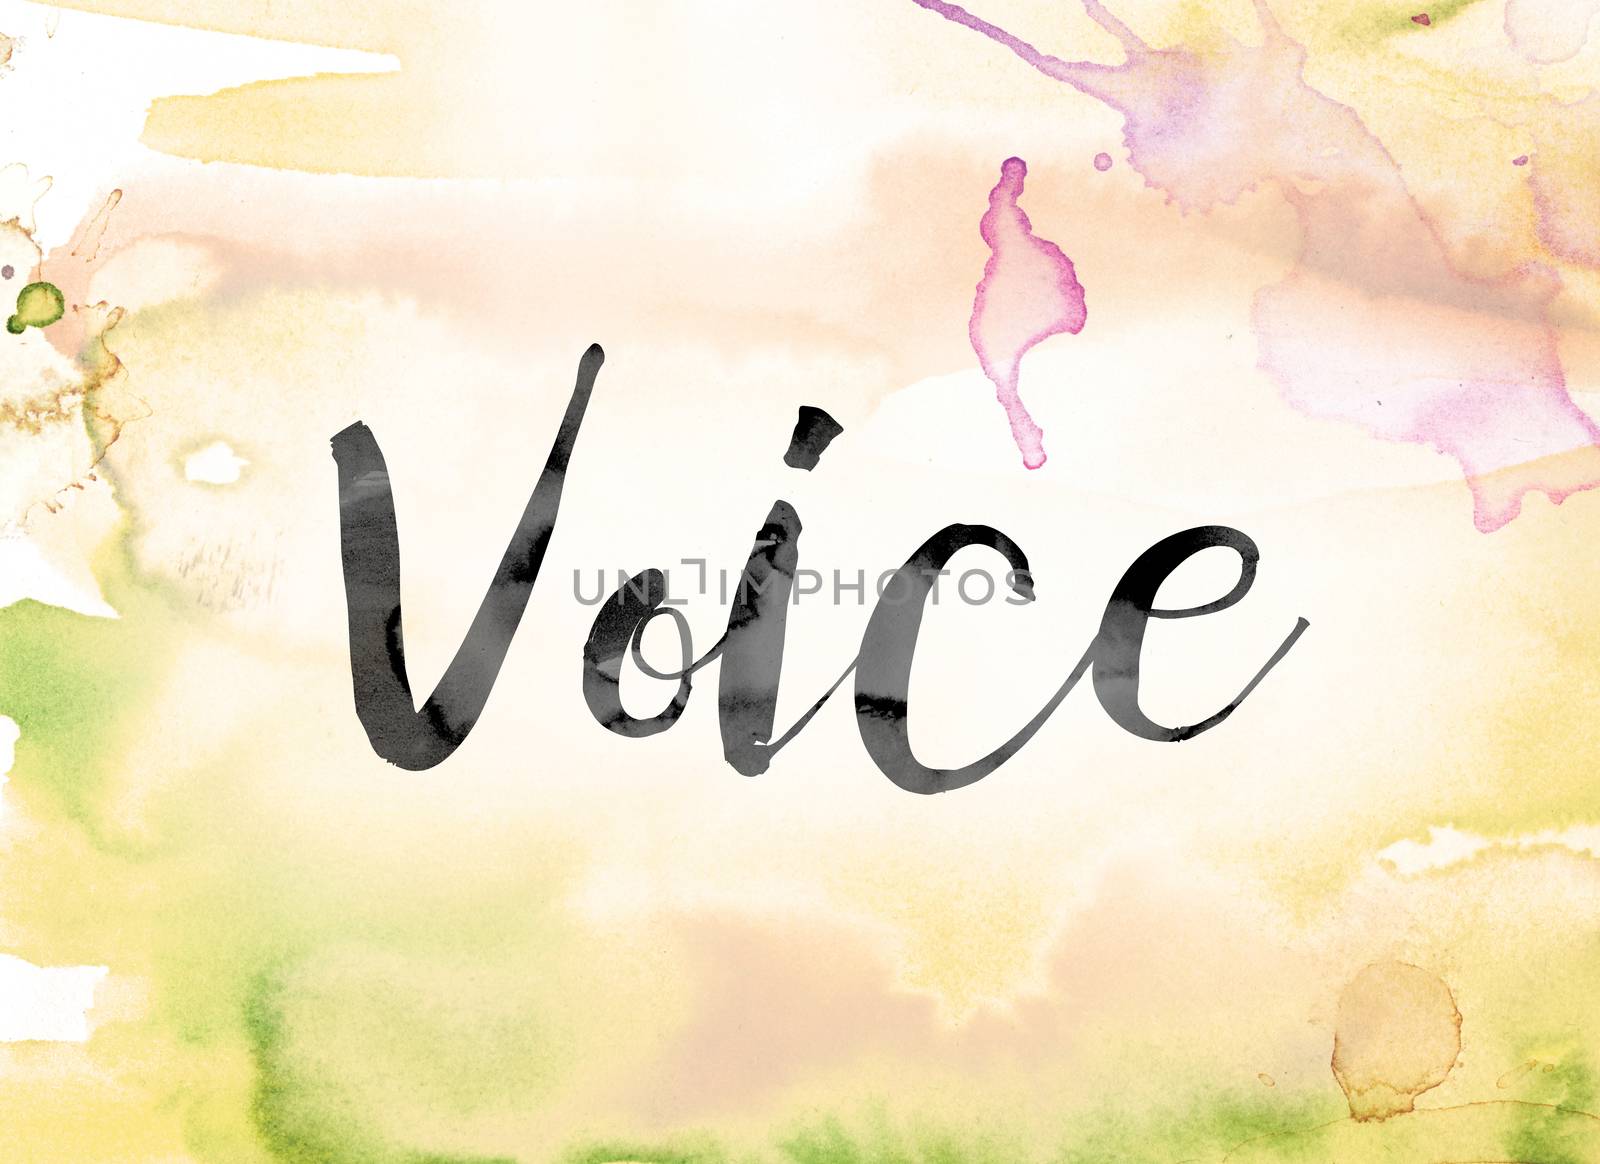 The word "Voice" painted in black ink over a colorful watercolor washed background concept and theme.